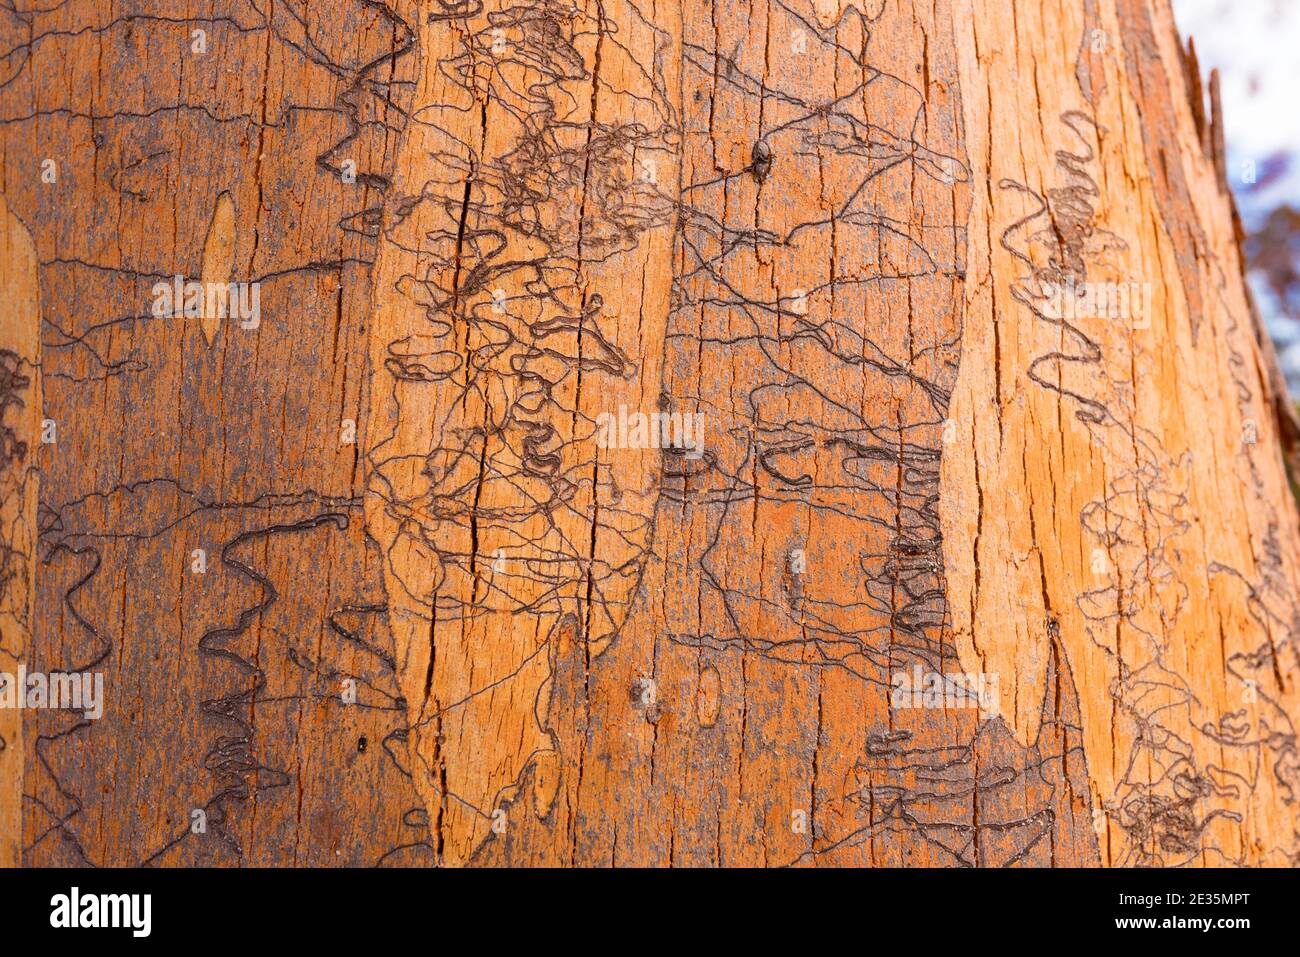 A close up image of the trunk of a Eucalyptus haemastoma or Scribbly Gum tree which is endemic to the Sydney region in Australia Stock Photo